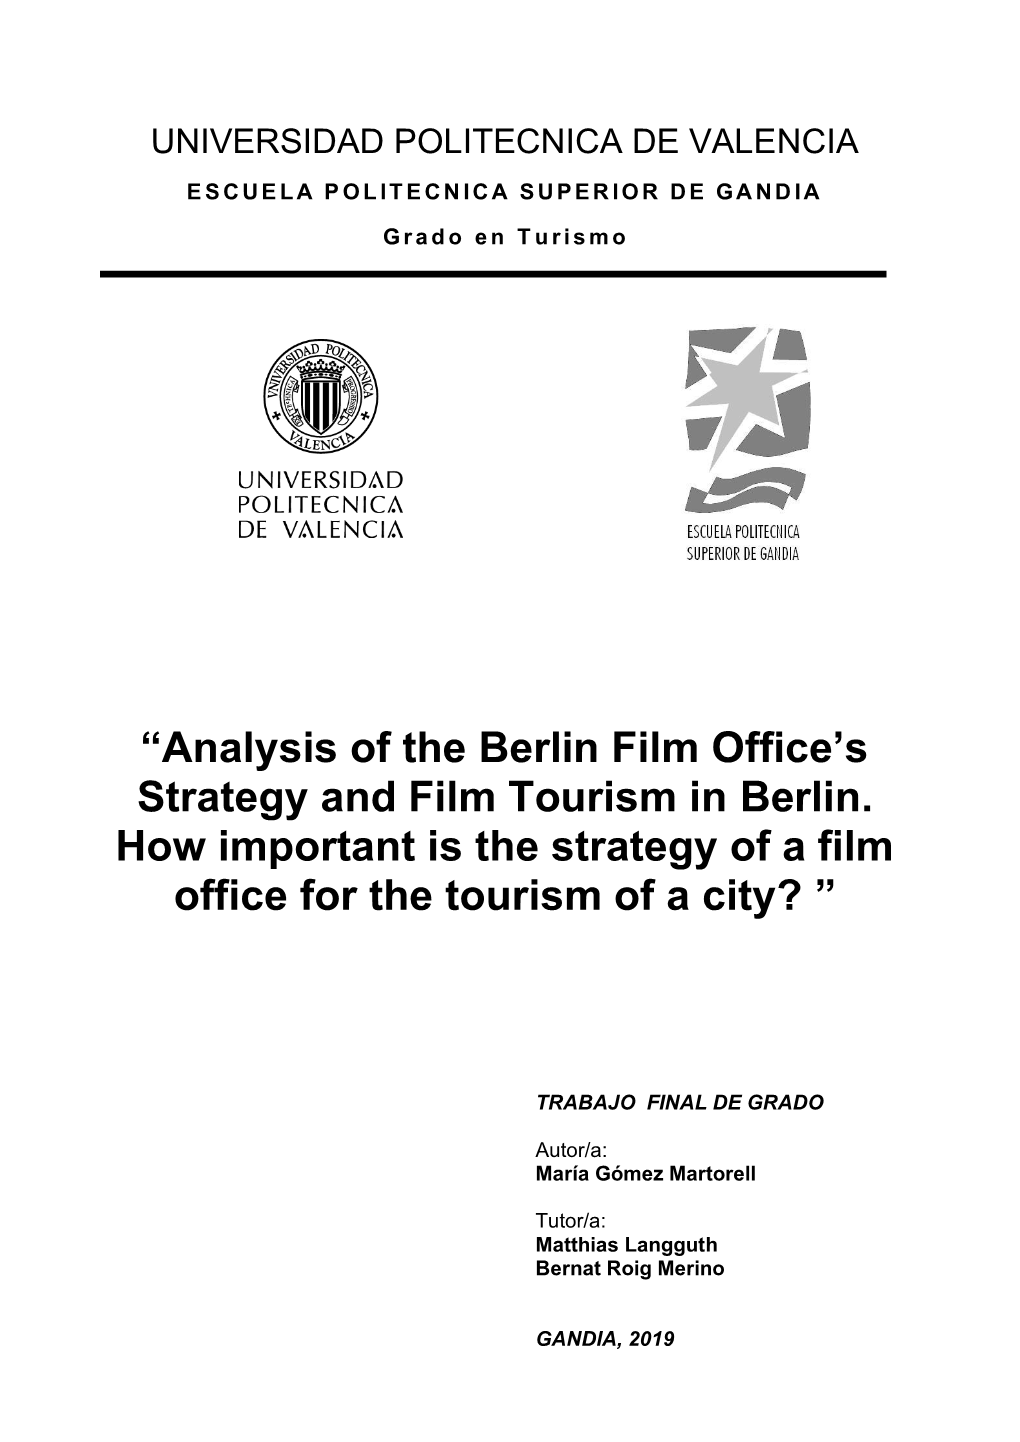 Analysis of the Berlin Film Office's Strategy and Film Tourism